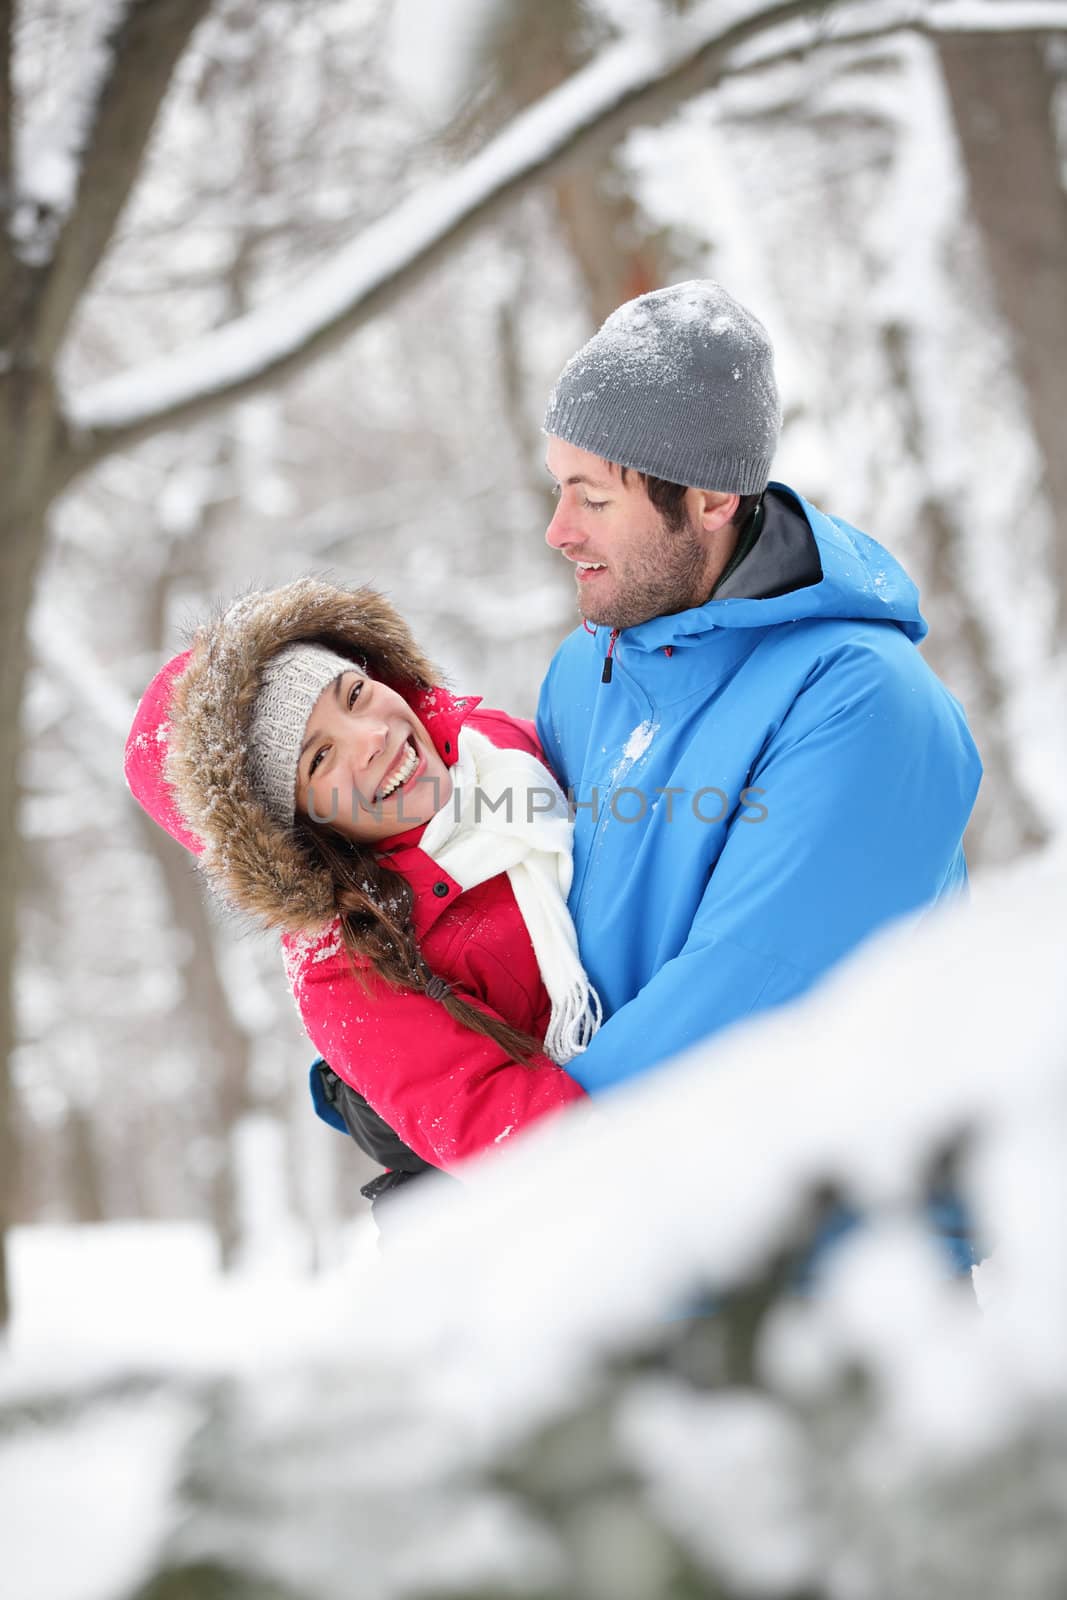 Romantic young couple holding each other in a close embrace and laughing merrily hugging in the snow